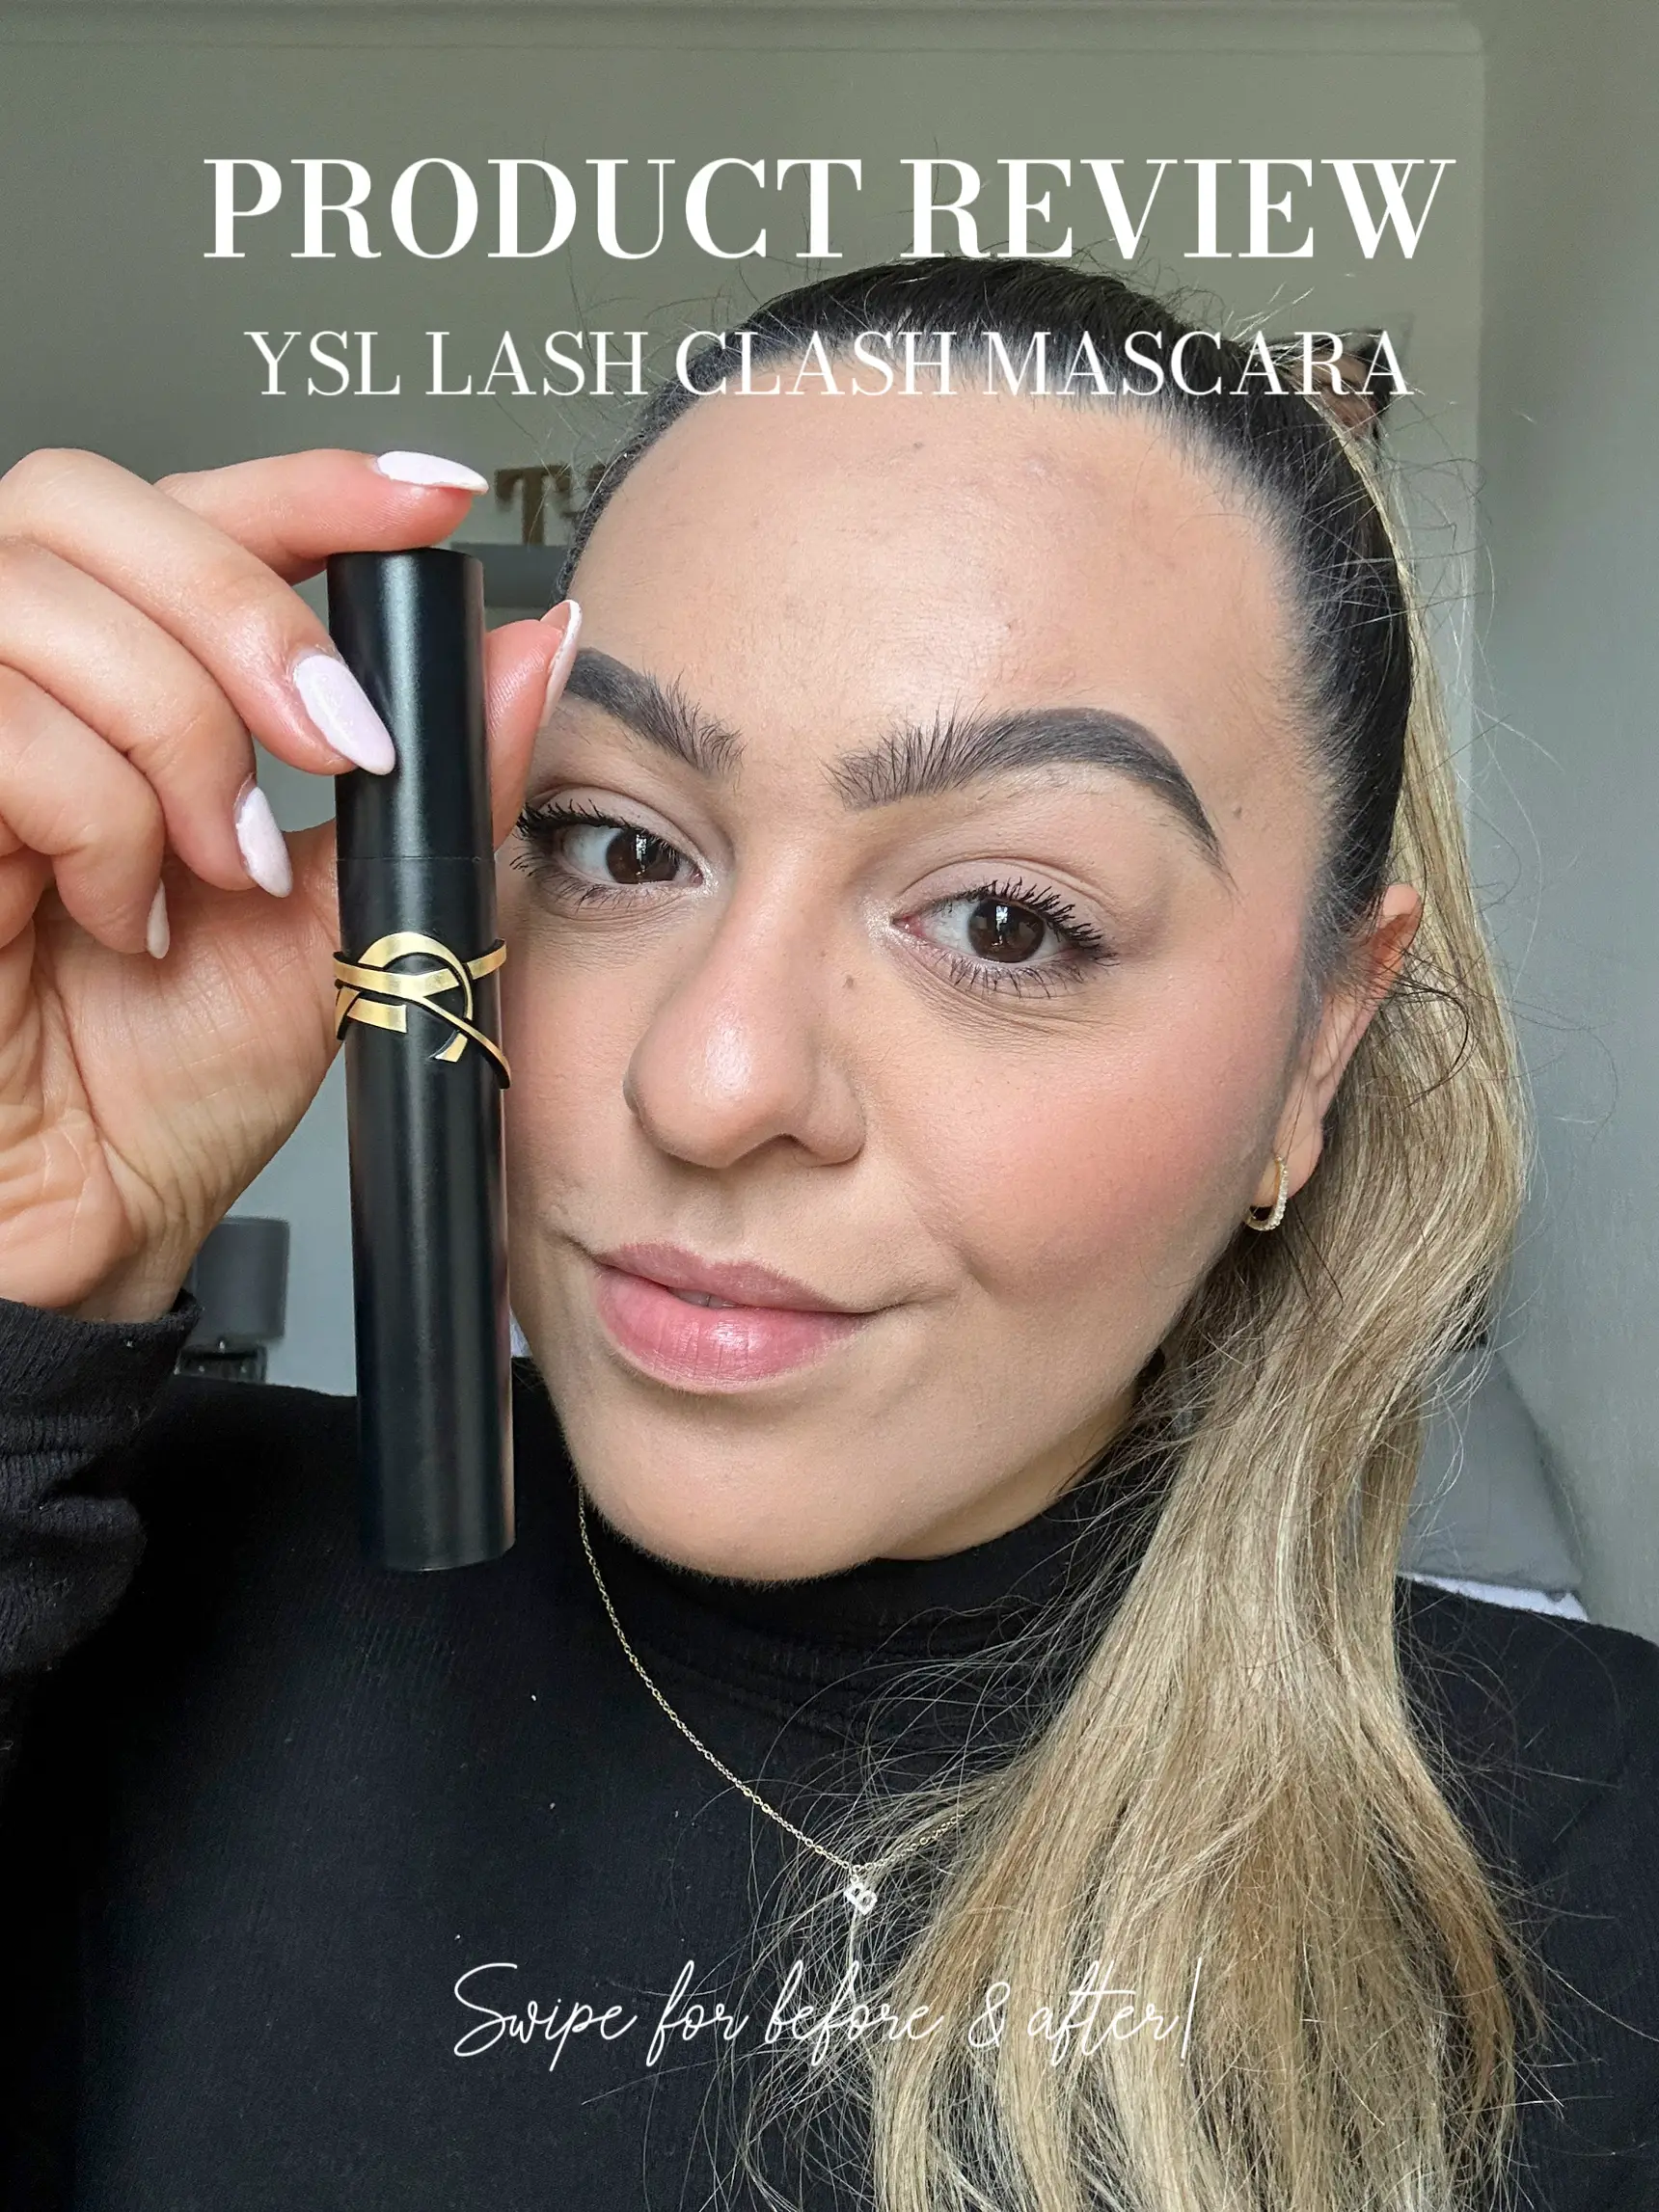 YSL Mascara: Product Review  Gallery posted by Tatiana Correia